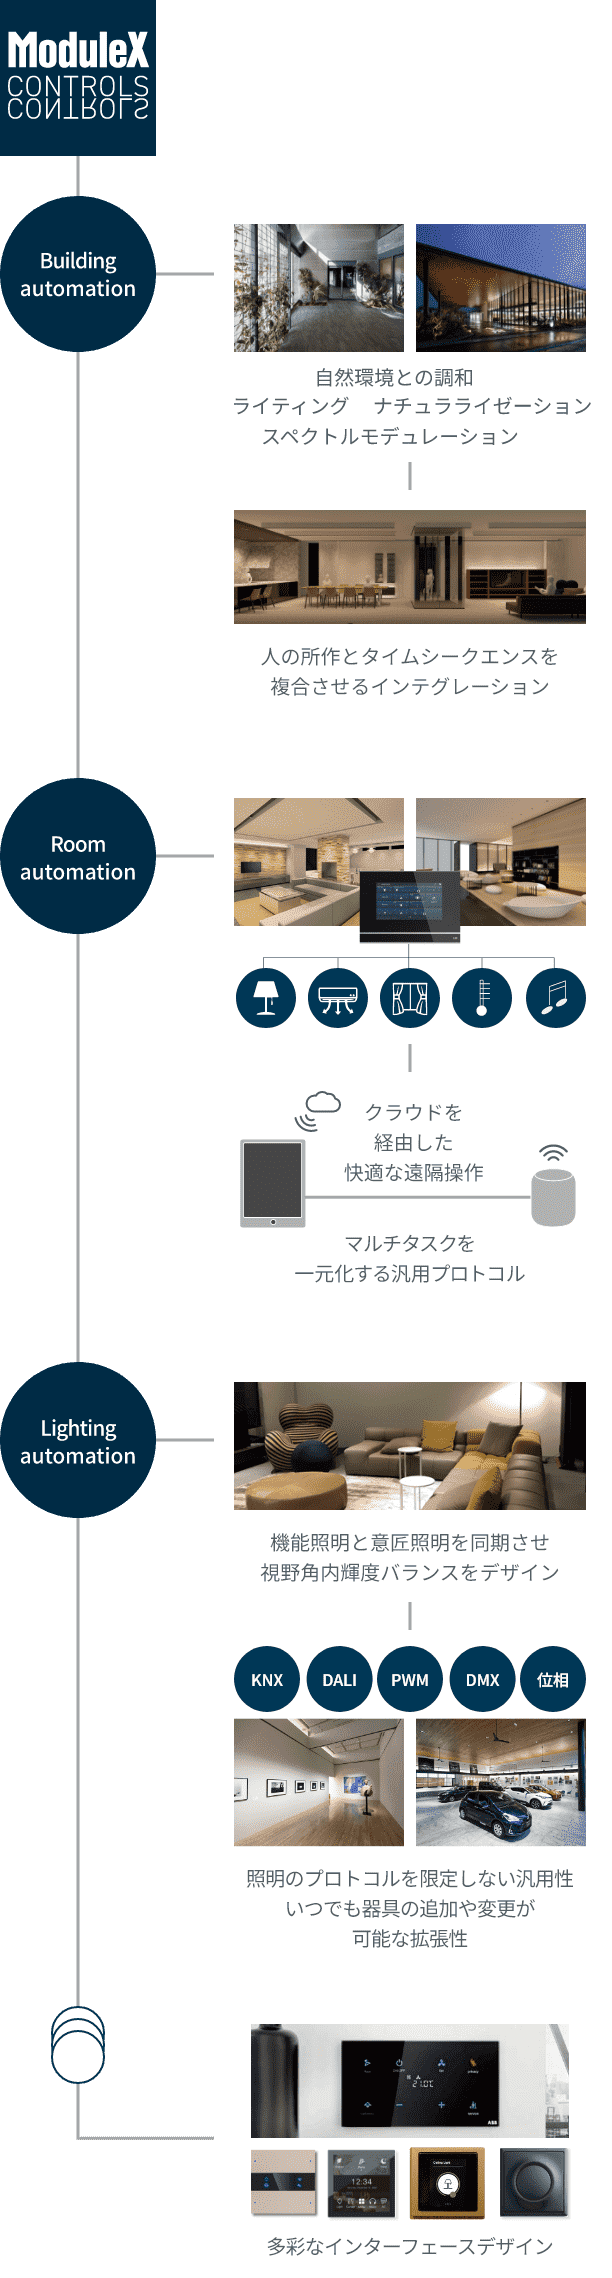 Building automation、Room automation、Lighting automation